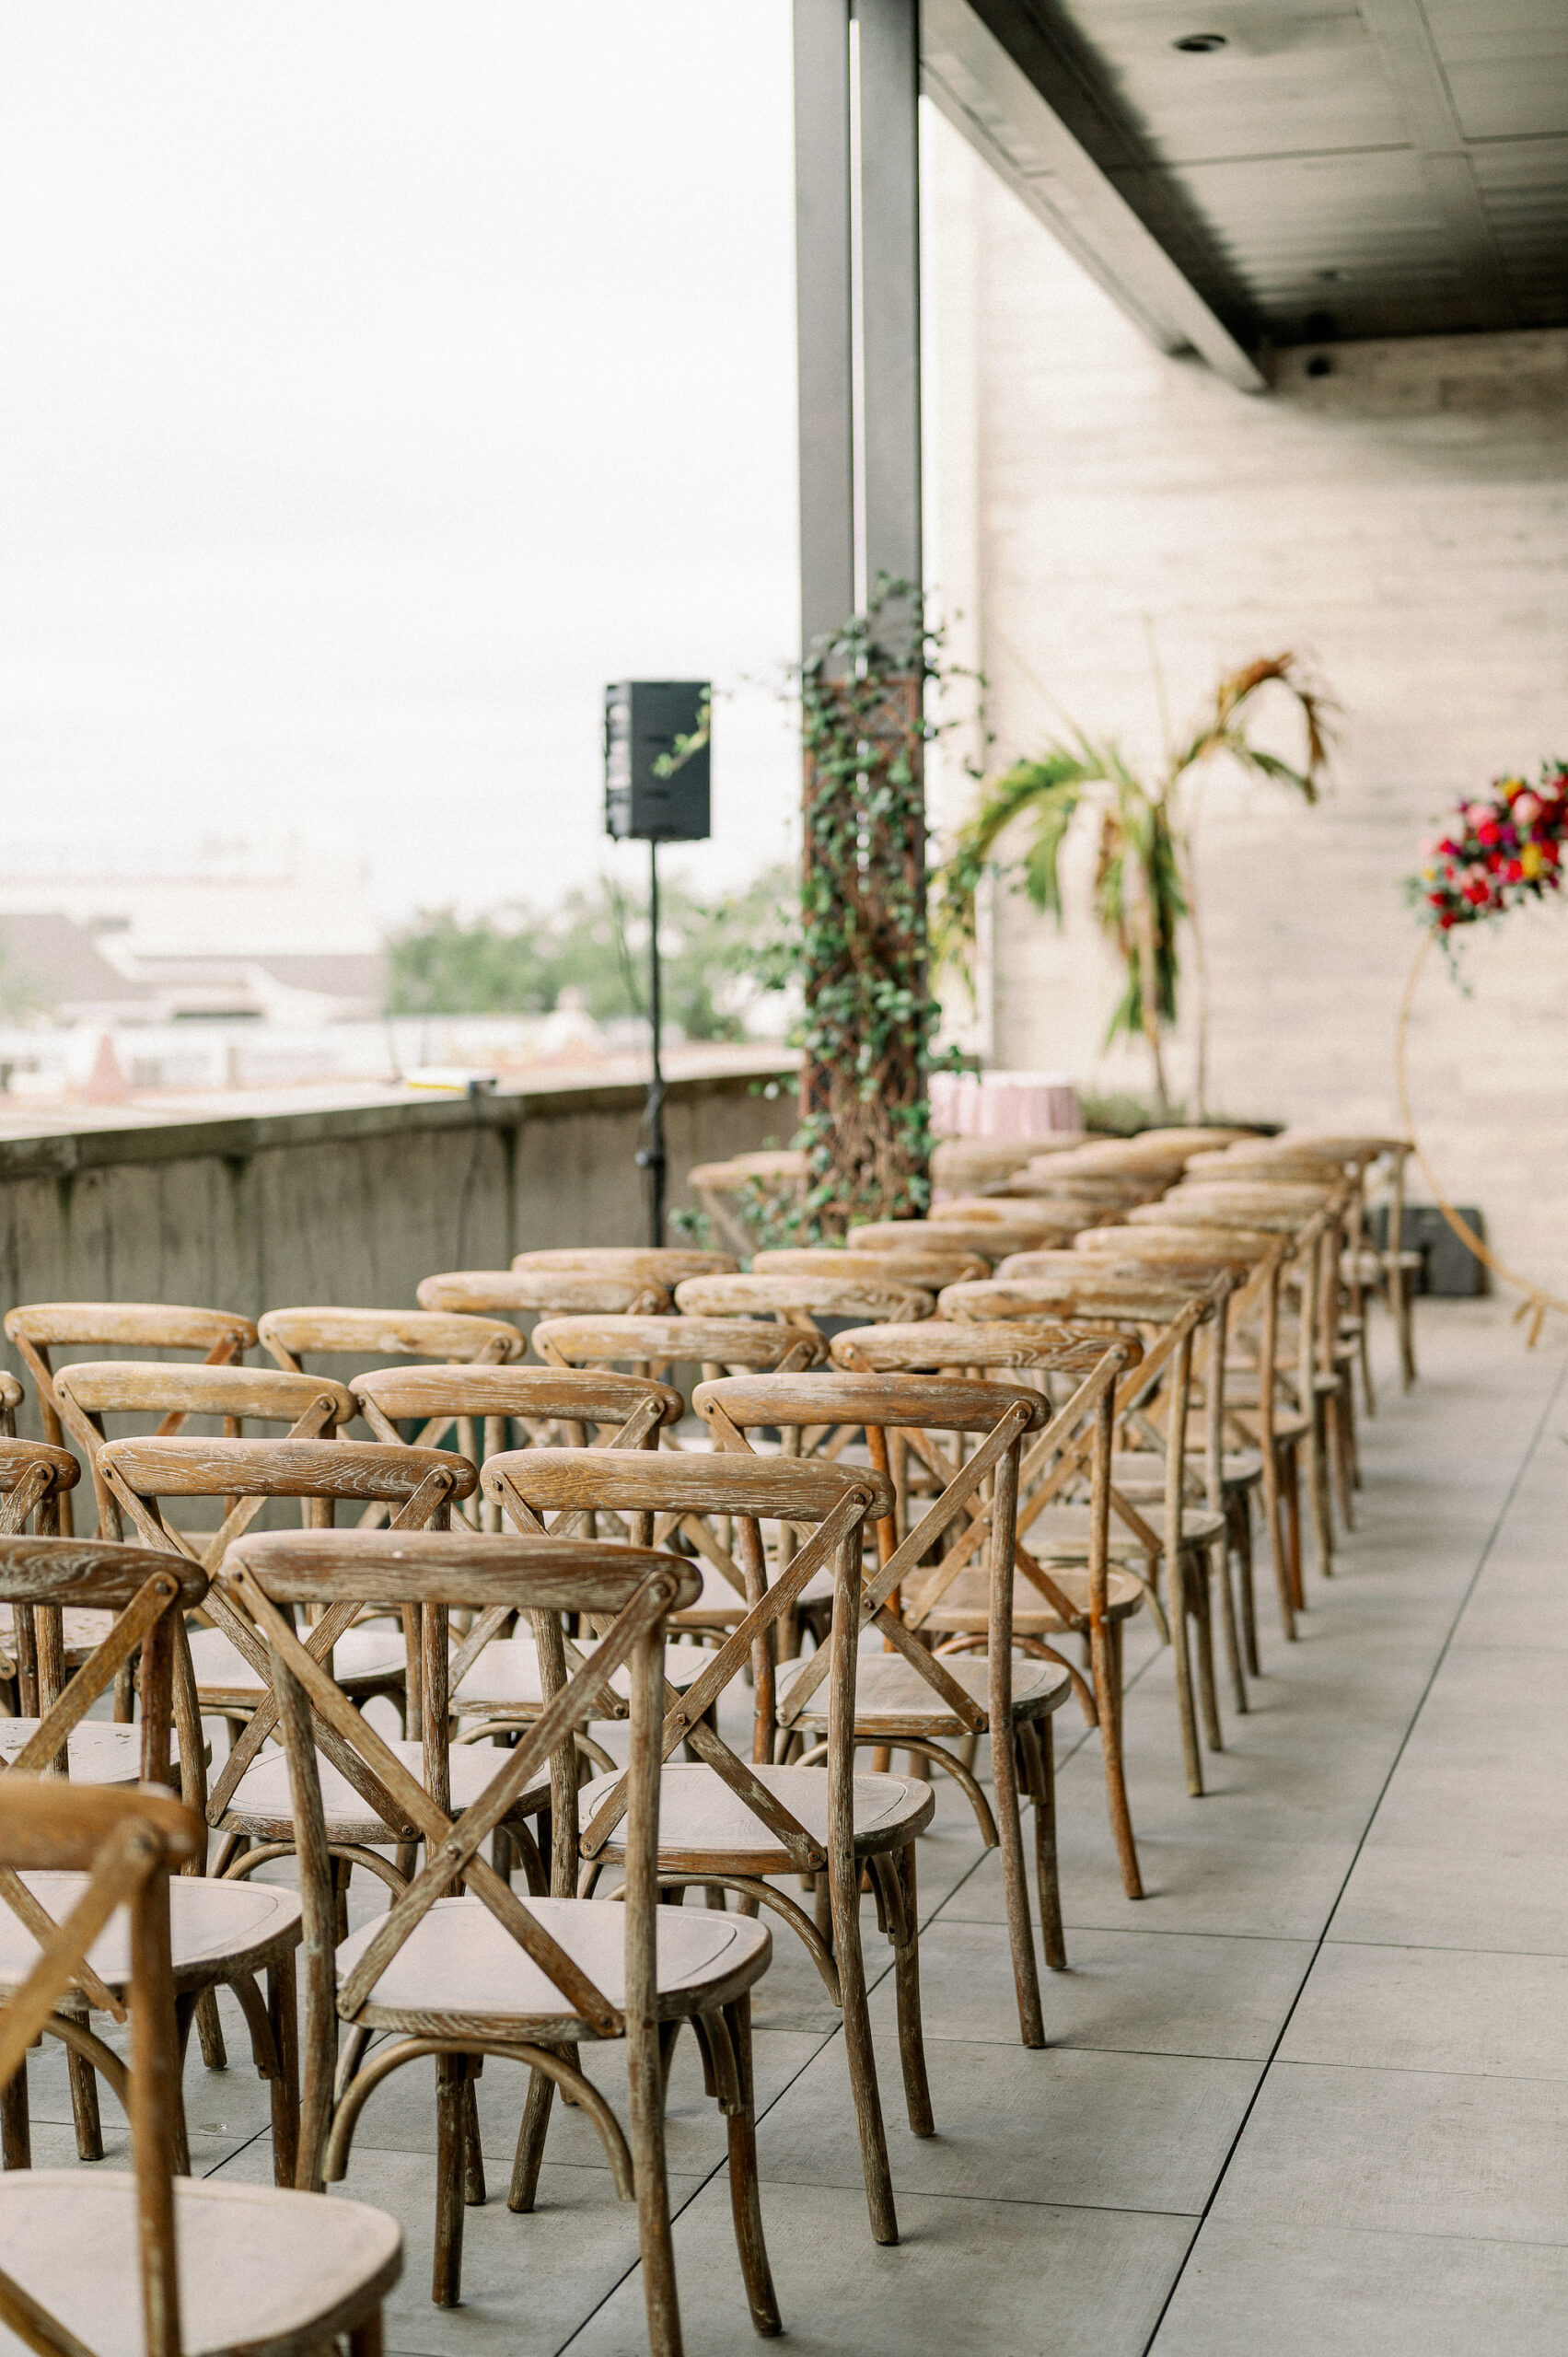 Wedding Ceremony Decor, Wooden Cross Back Chairs | Tampa bay Wedding Photographer Dewitt for Love Photography | Tampa Industrial Modern Wedding Venue Hyde House | Wedding Rentals Gabro Event Services